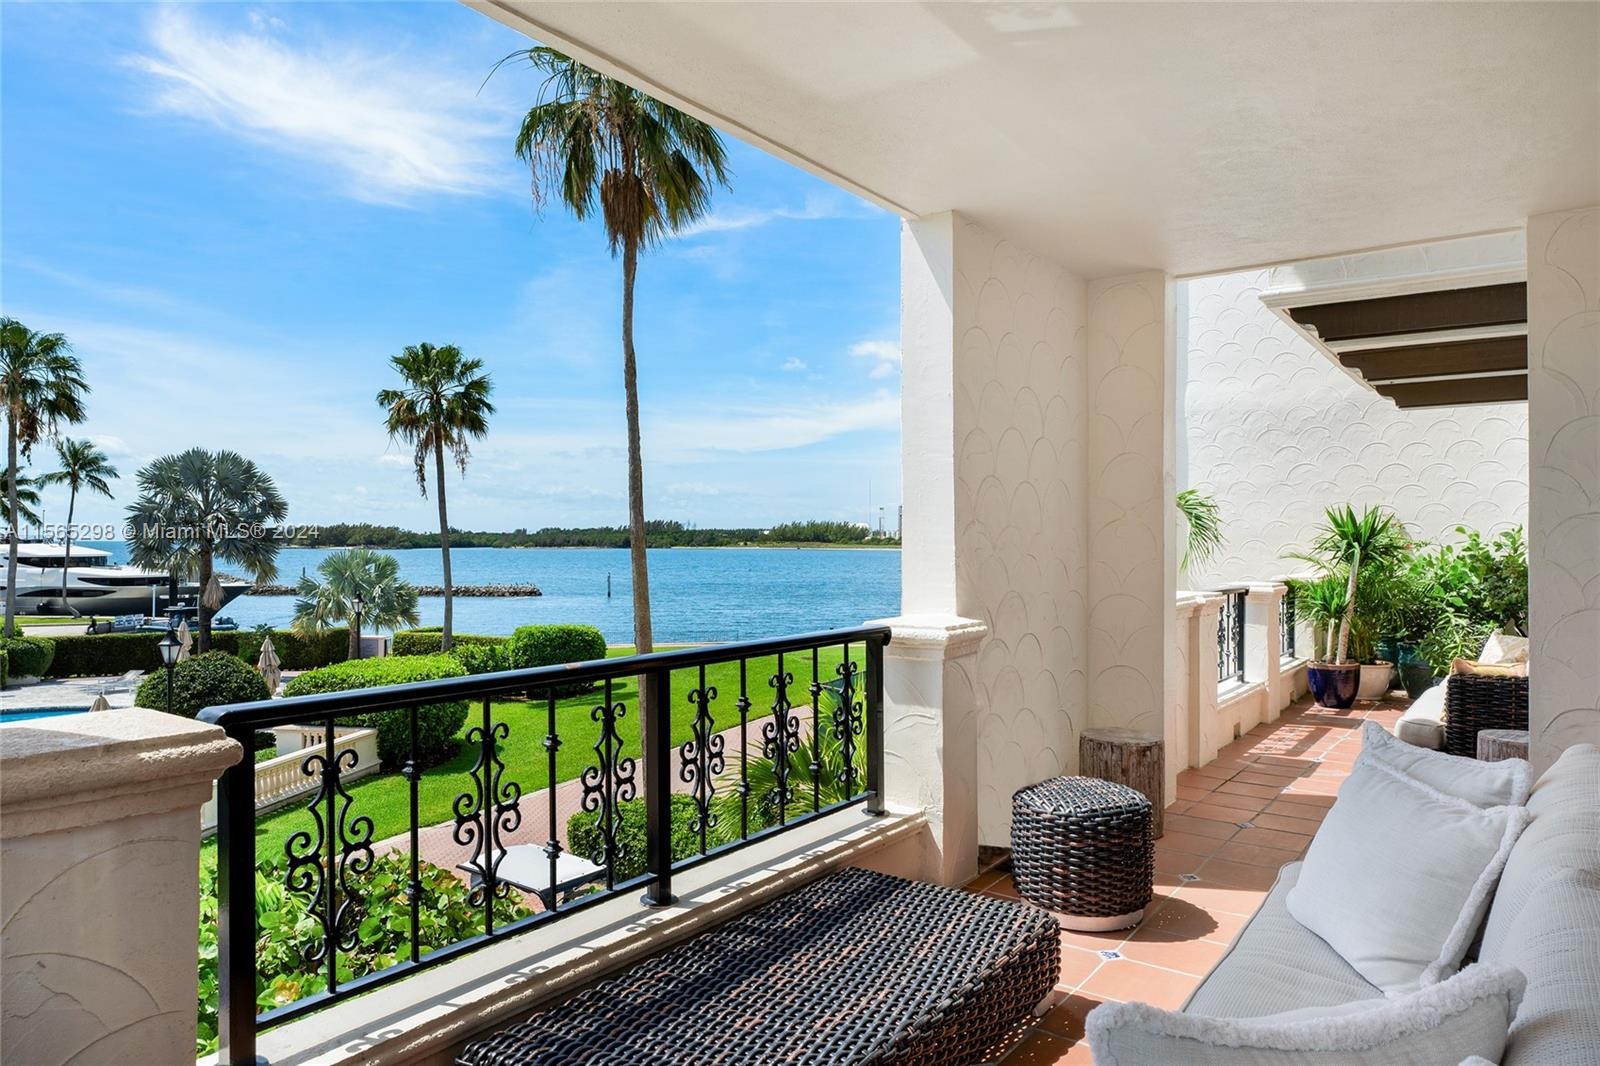 29. 2221 Fisher Island Dr